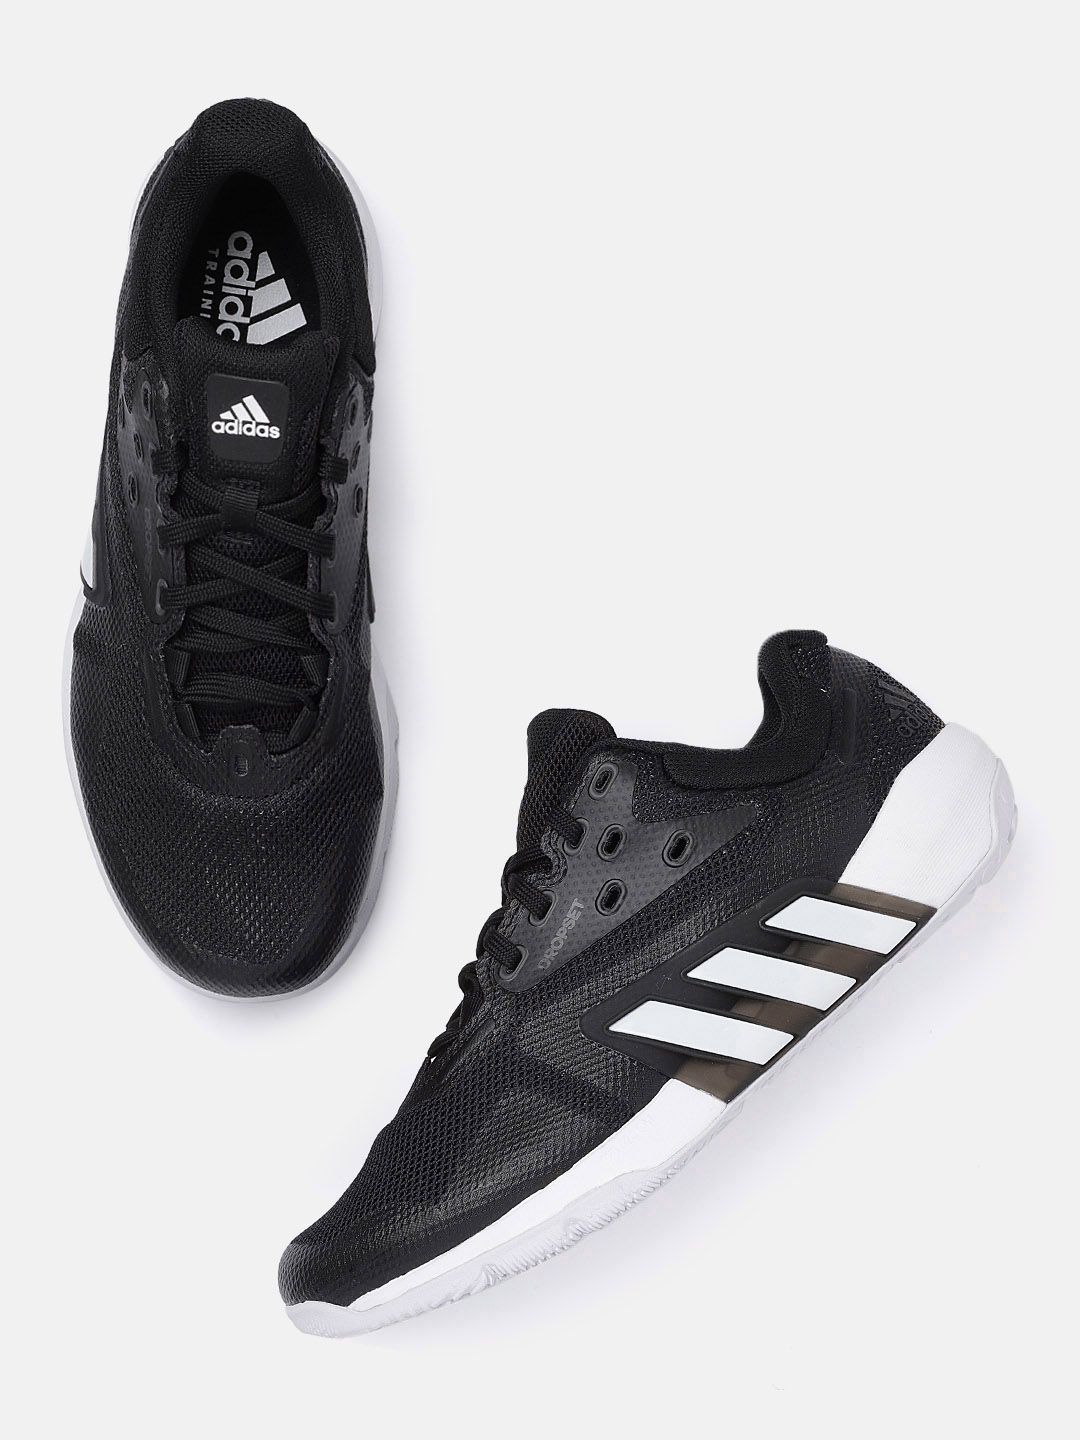 ADIDAS Women Black Woven Design Dropset Sustainable Training Shoes Price in India